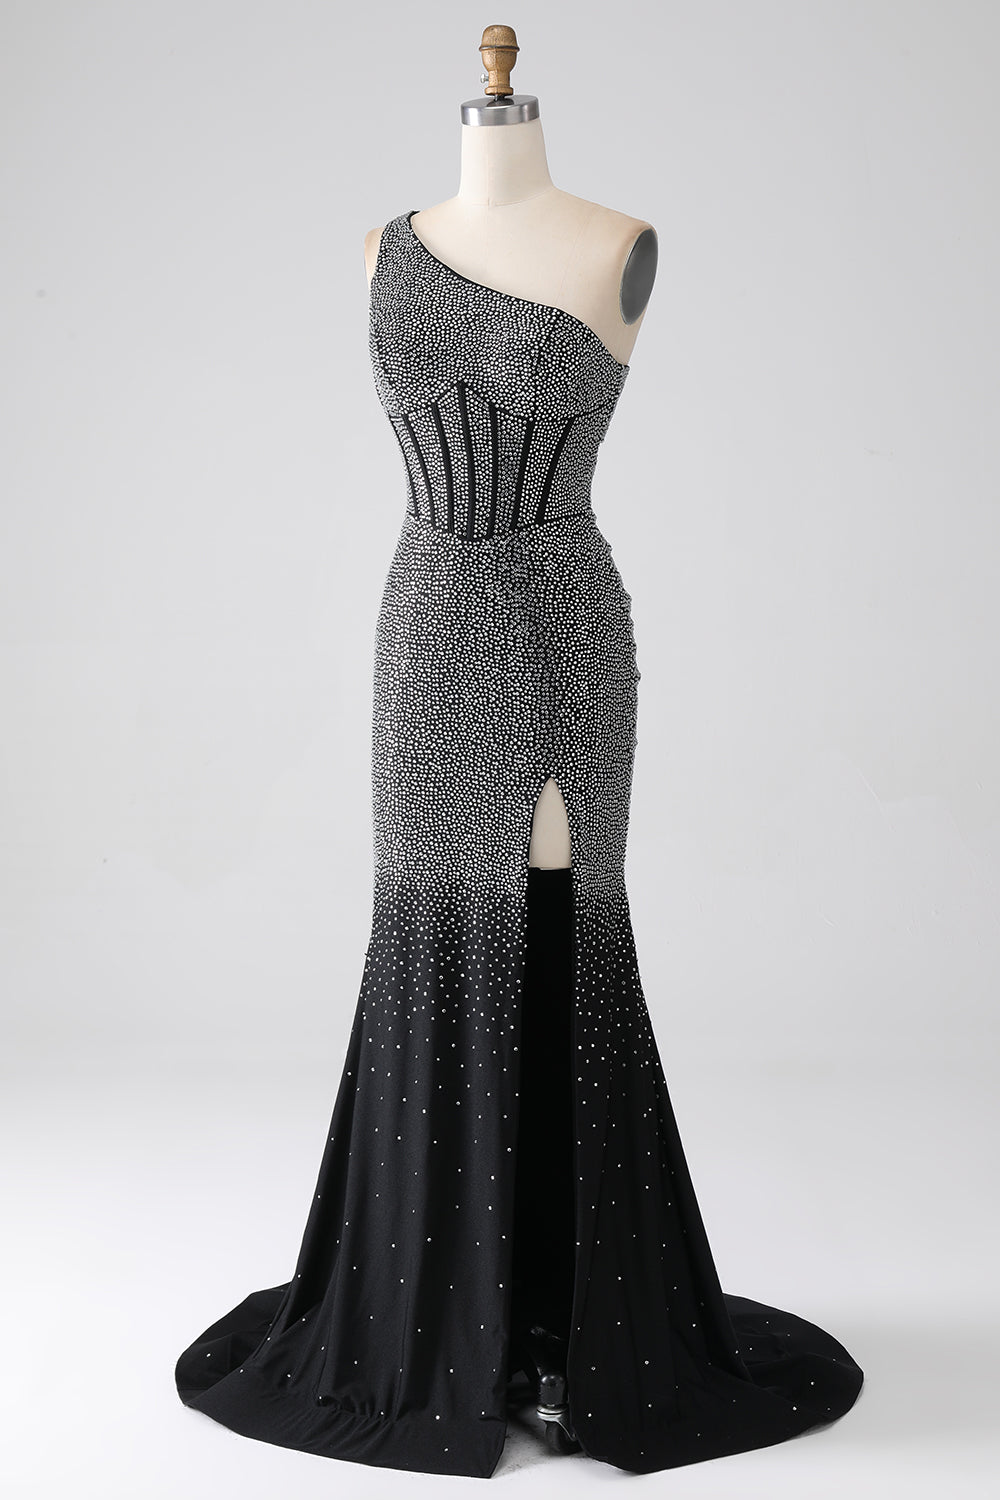 Sparkly Black Mermaid One Shoulder Corset Prom Dress With Slit